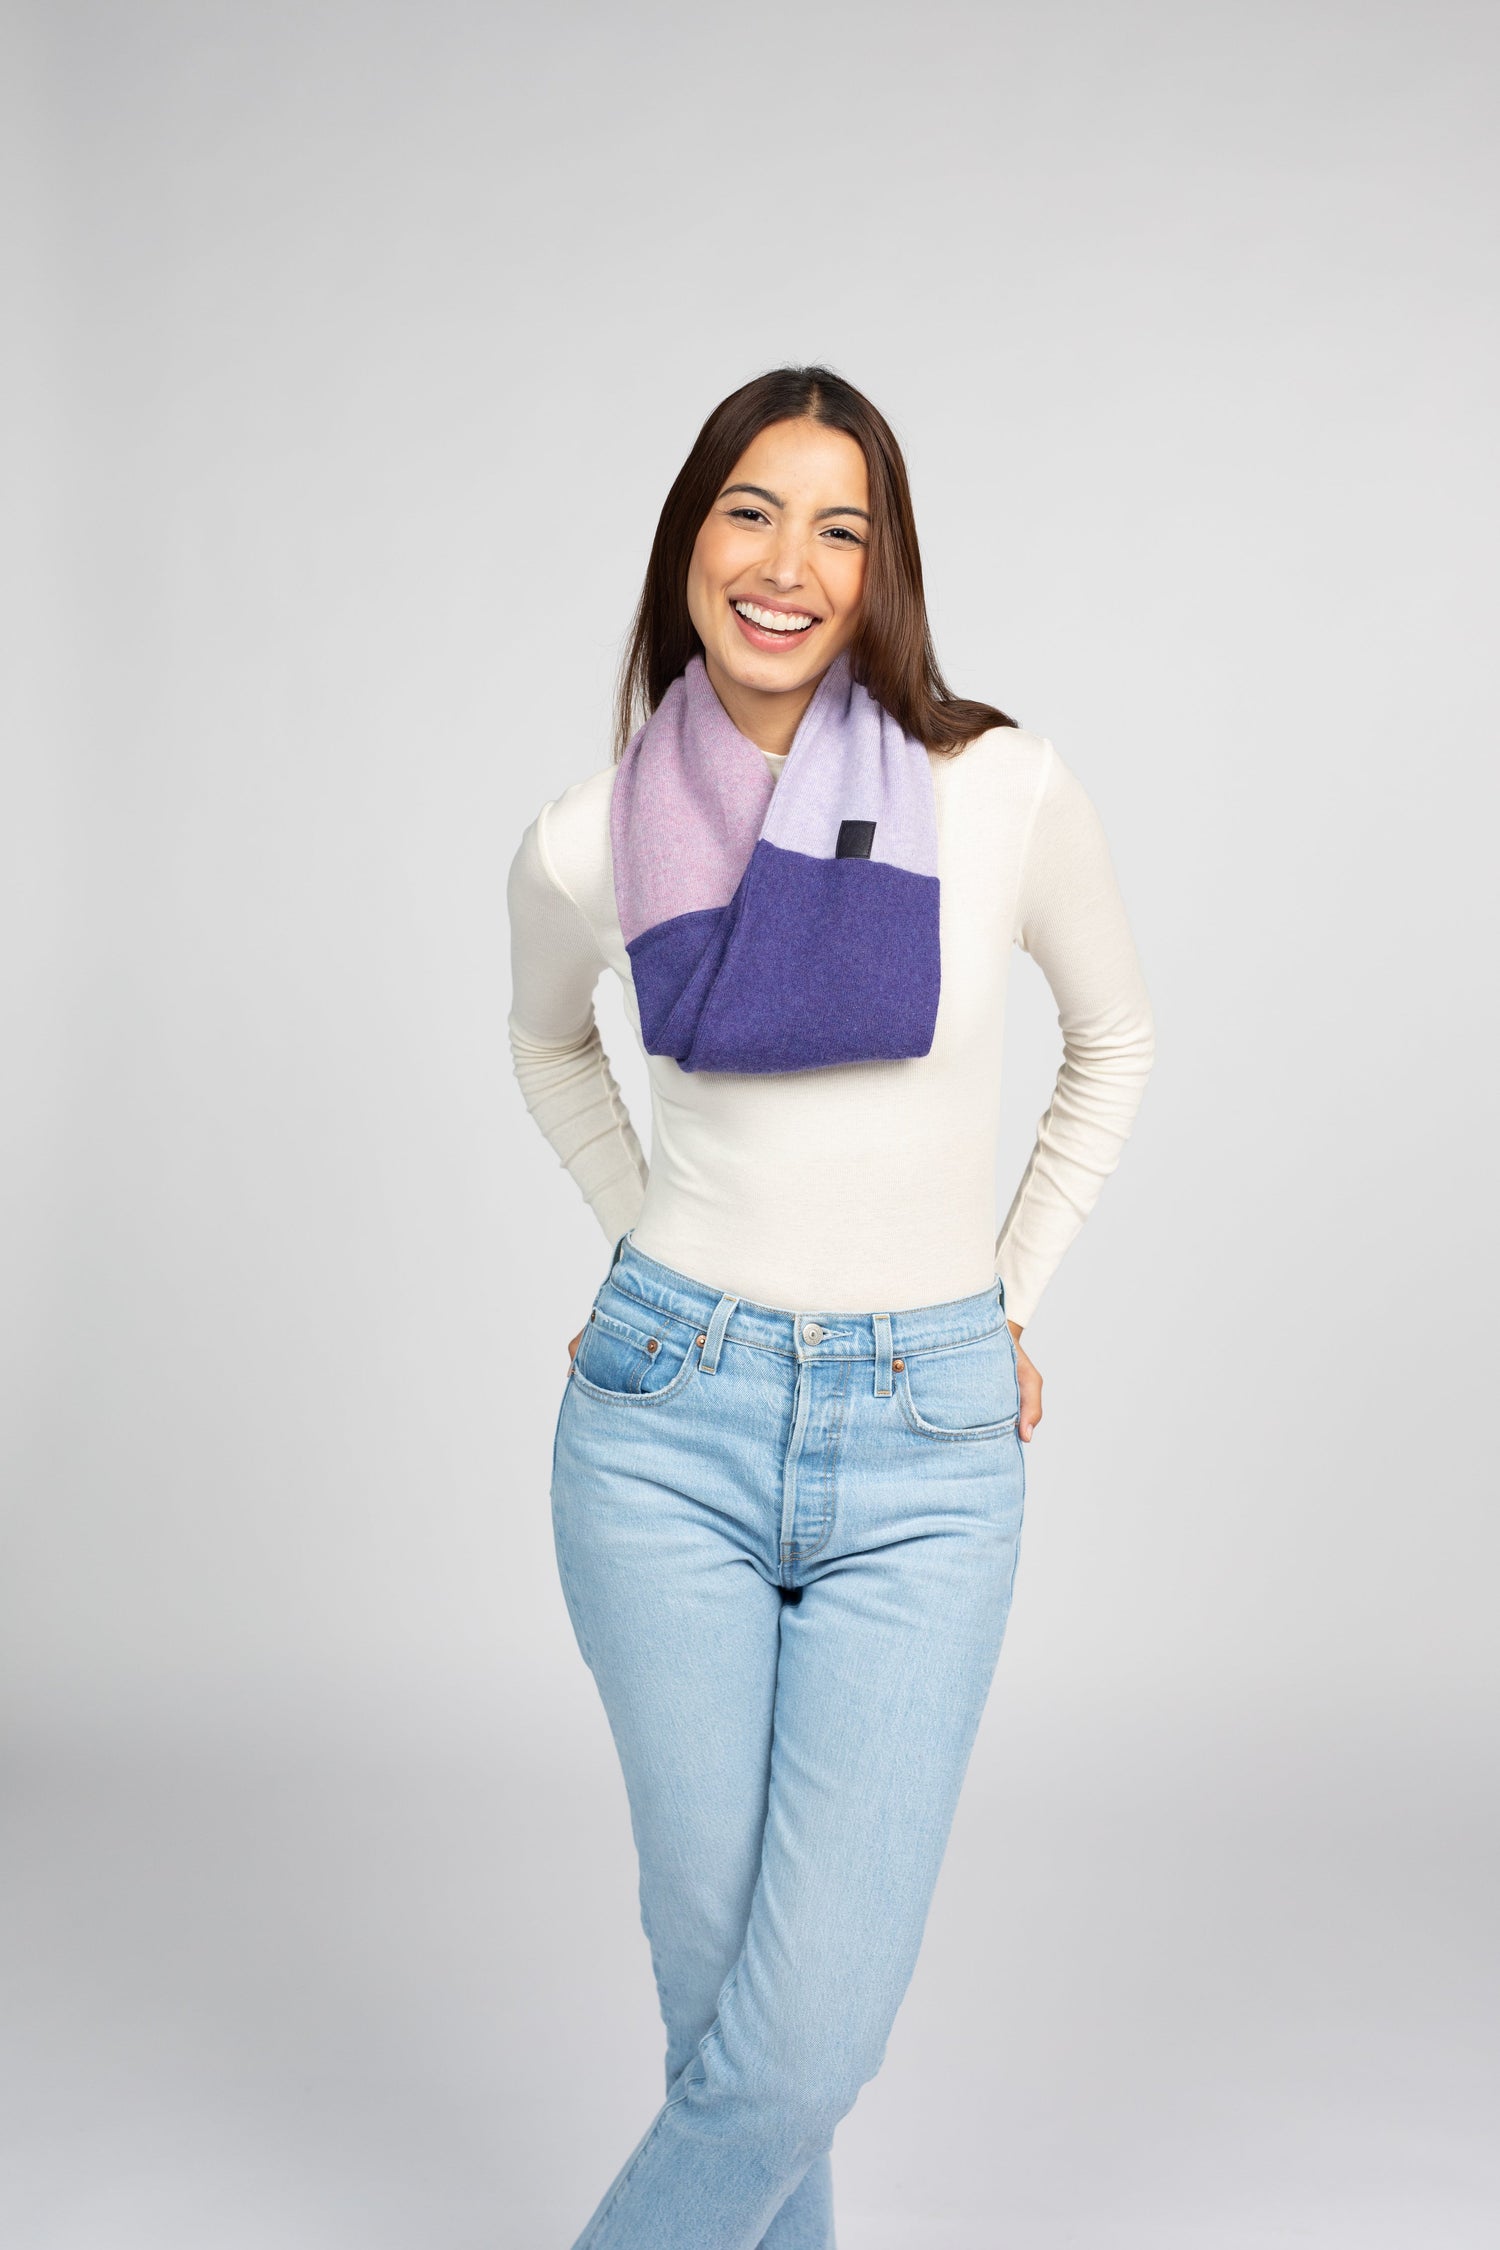 Purple and Lavender - Cashmere Infinity Scarf for Women